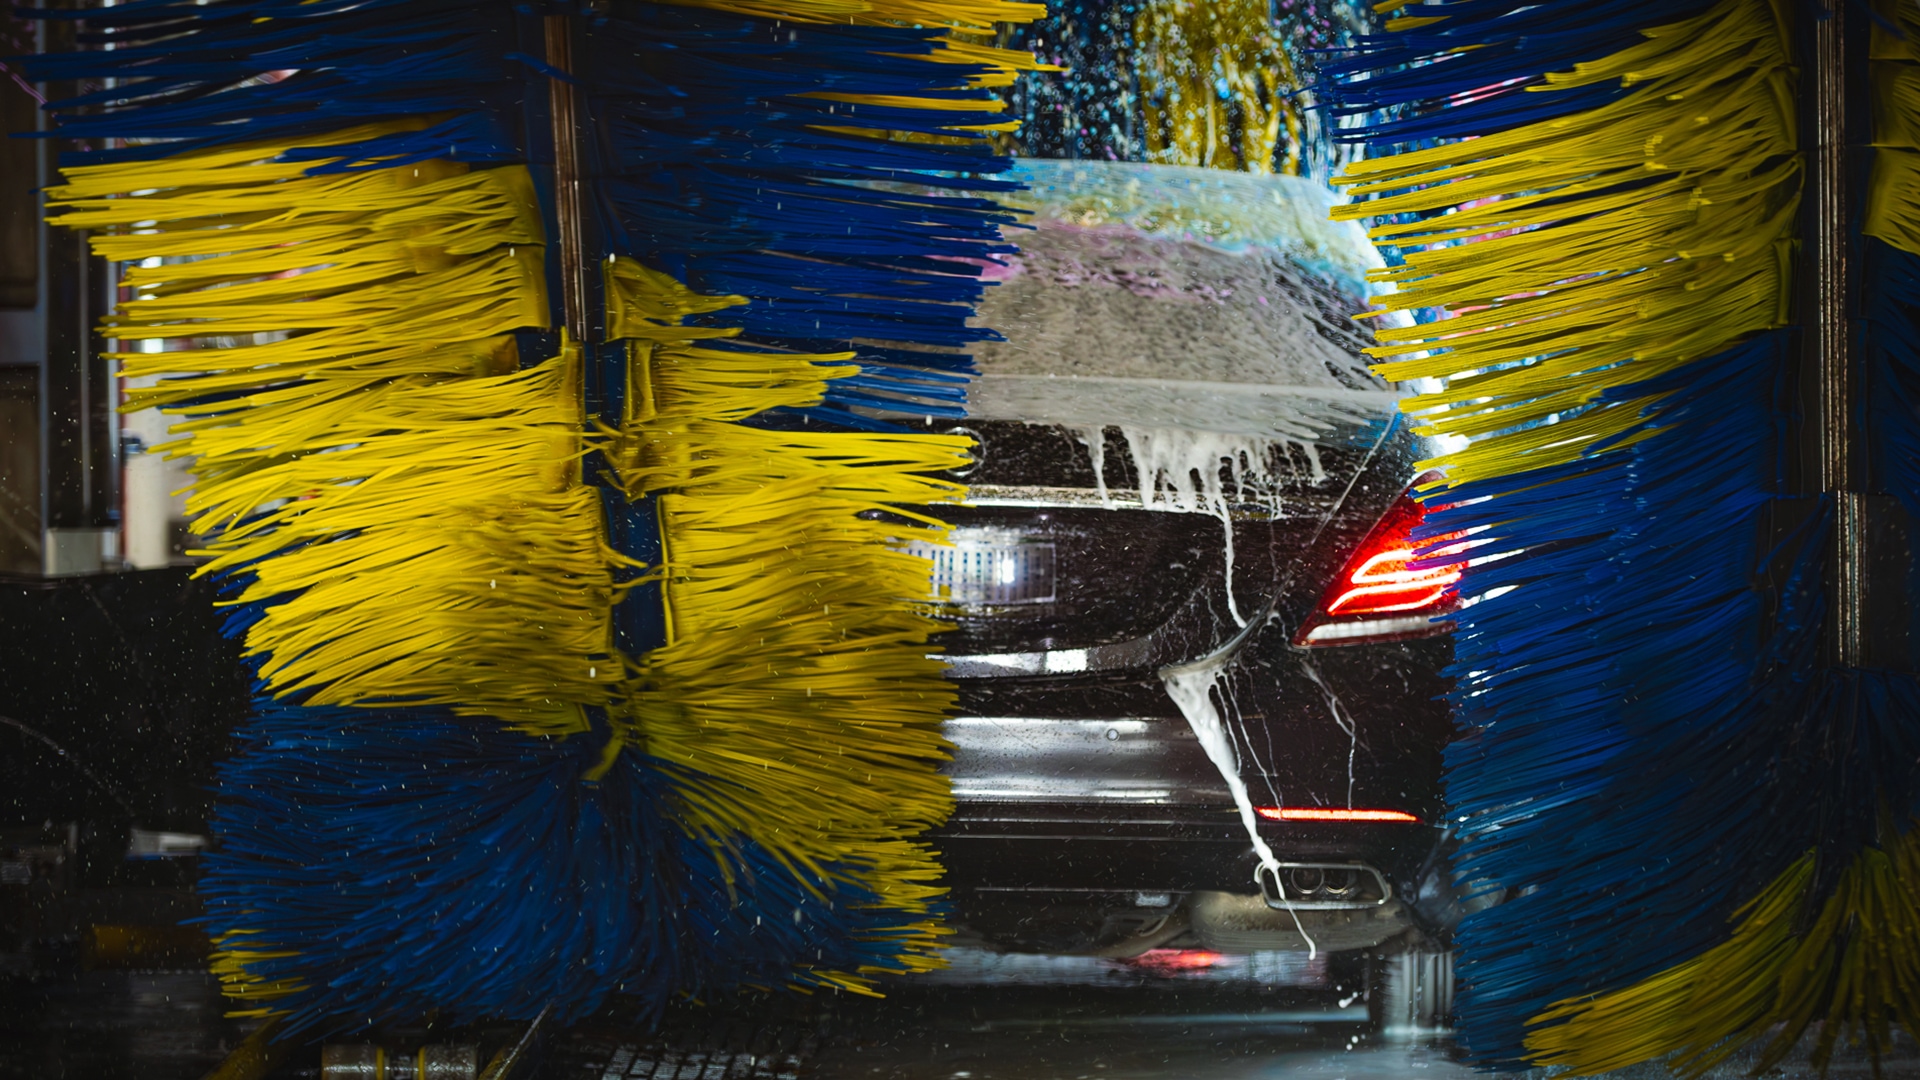 Closeup of a Valet automated car wash